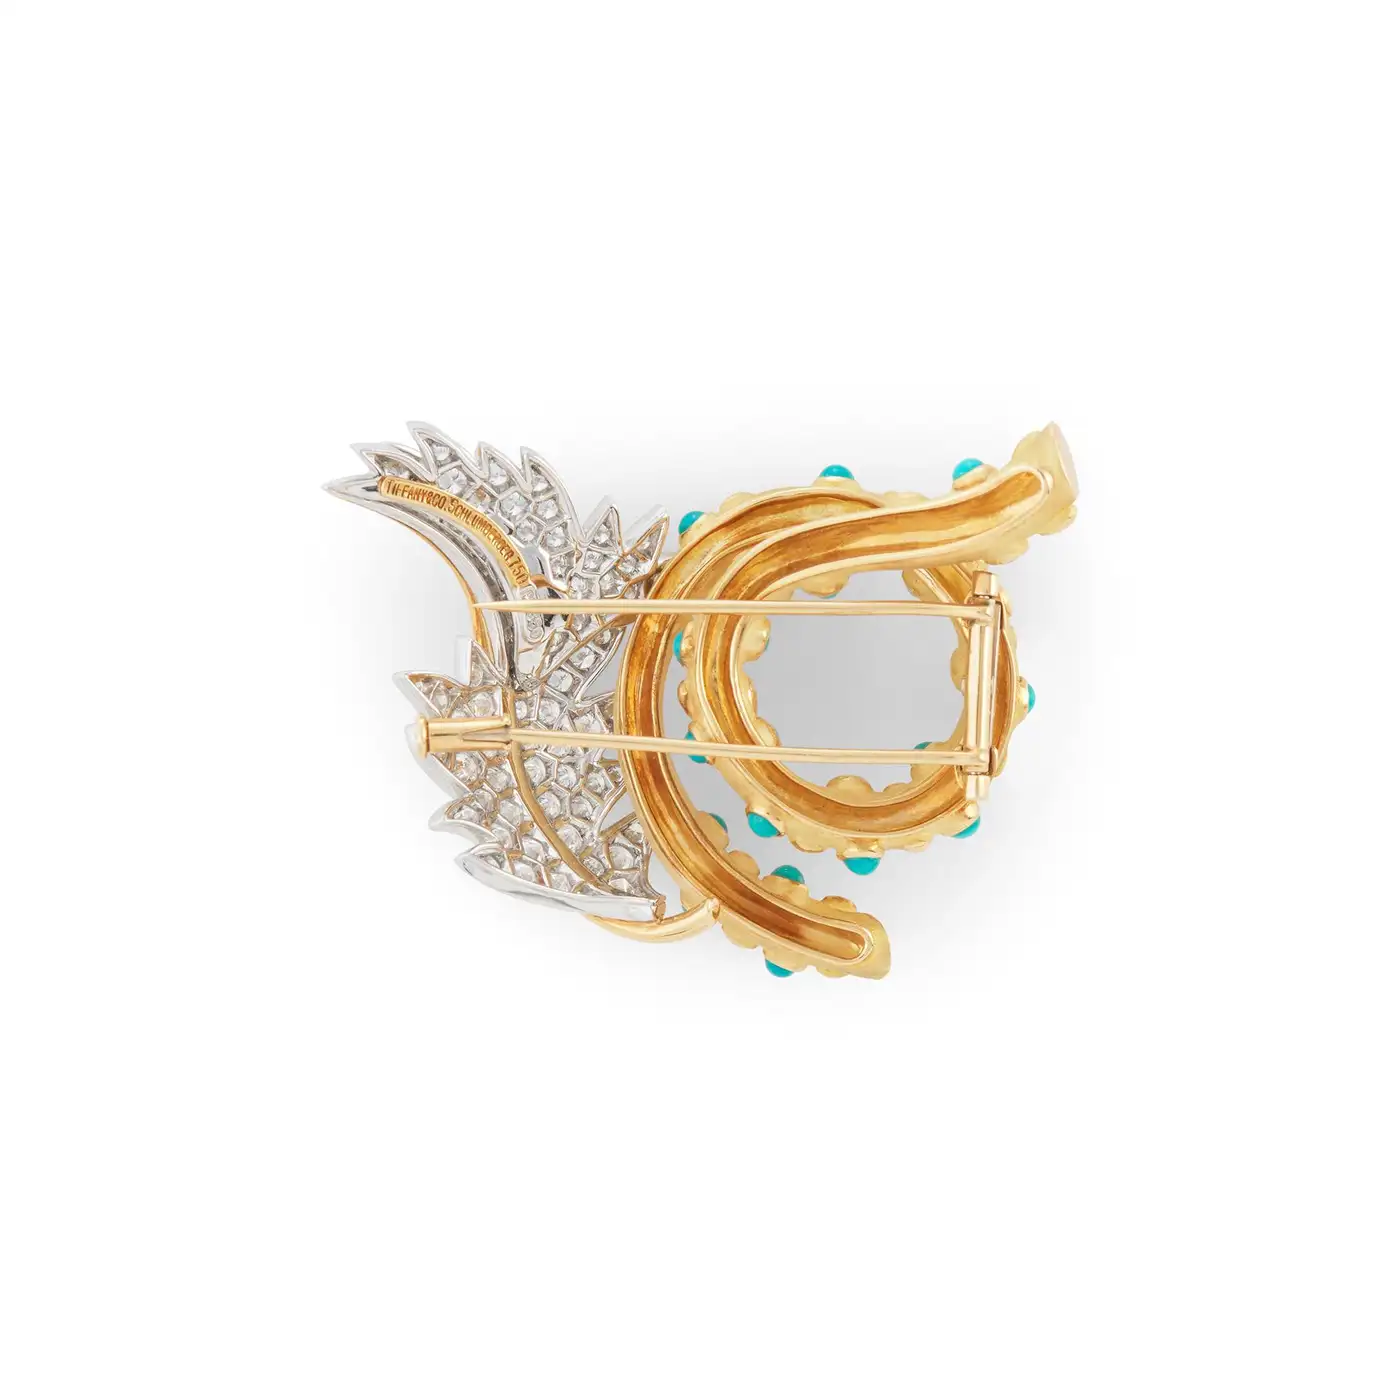 Buy-Diamond-and-Turquoise-brooch-Jean-Schlumberger-for-Tiffany-Co-5.webp